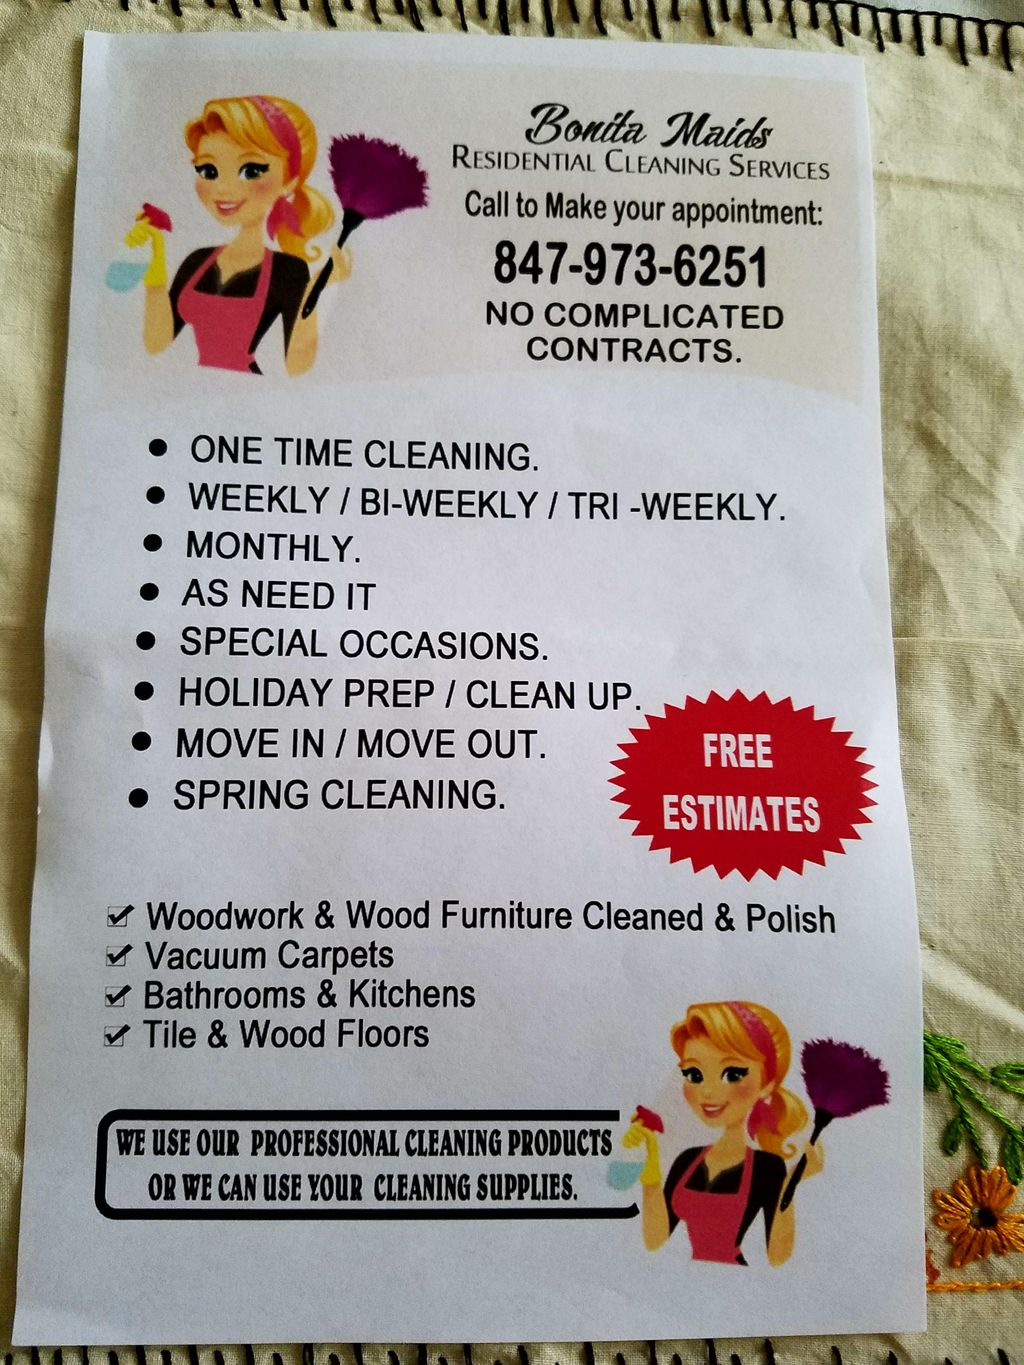 Bonita Maid's Residential cleaning services